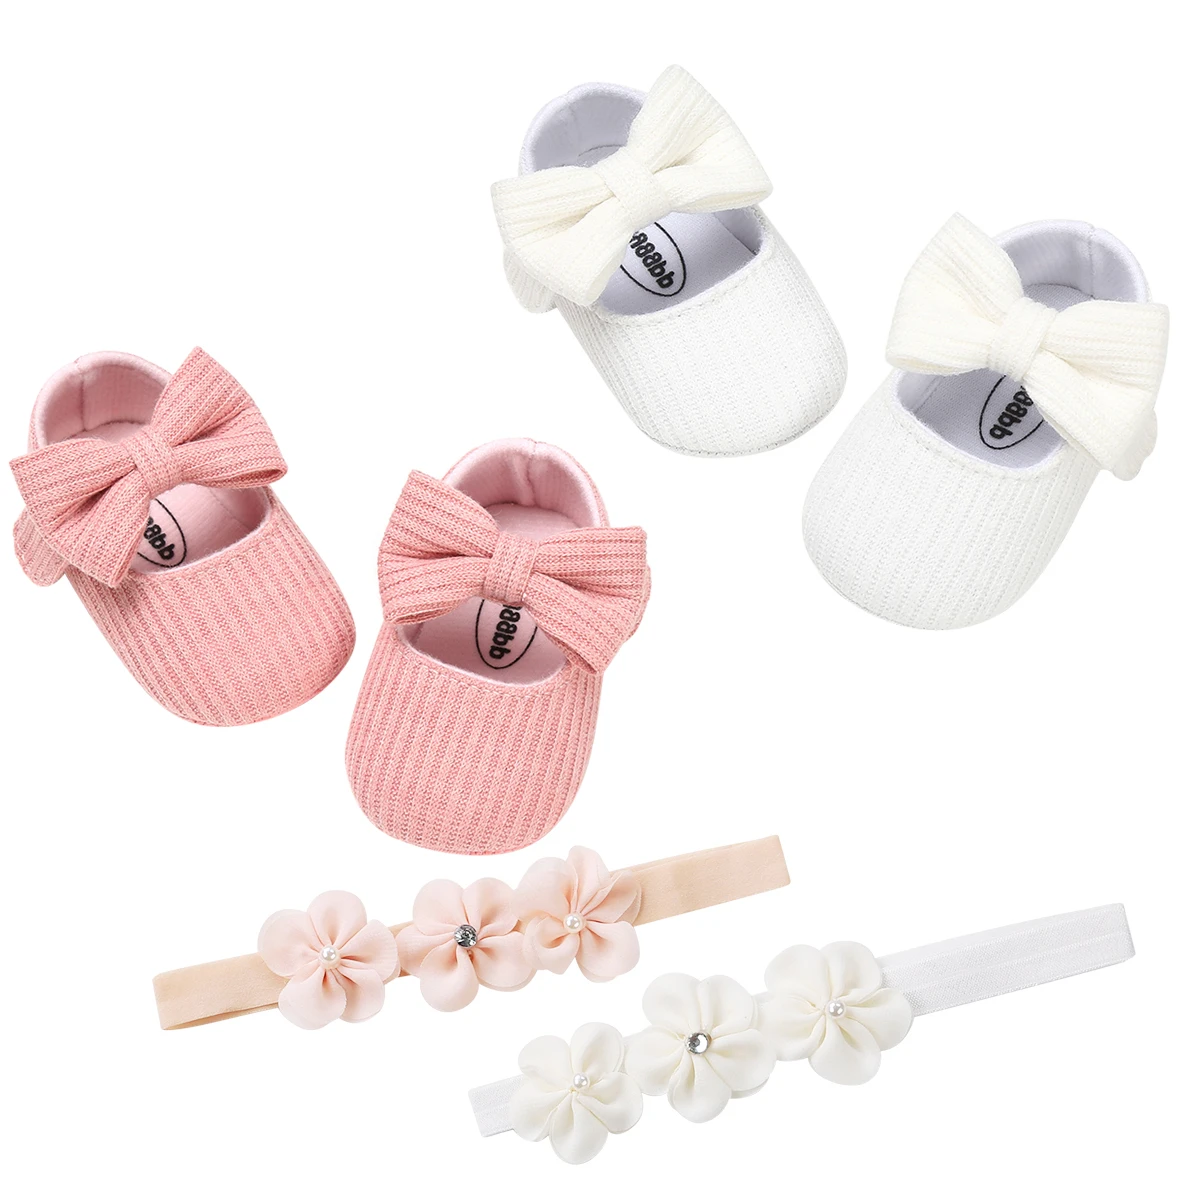 Fashion Gril Baby Shoes Lace Bowknot Little with Plaid headbands Girl Princess Infant Baby Dress Shoes